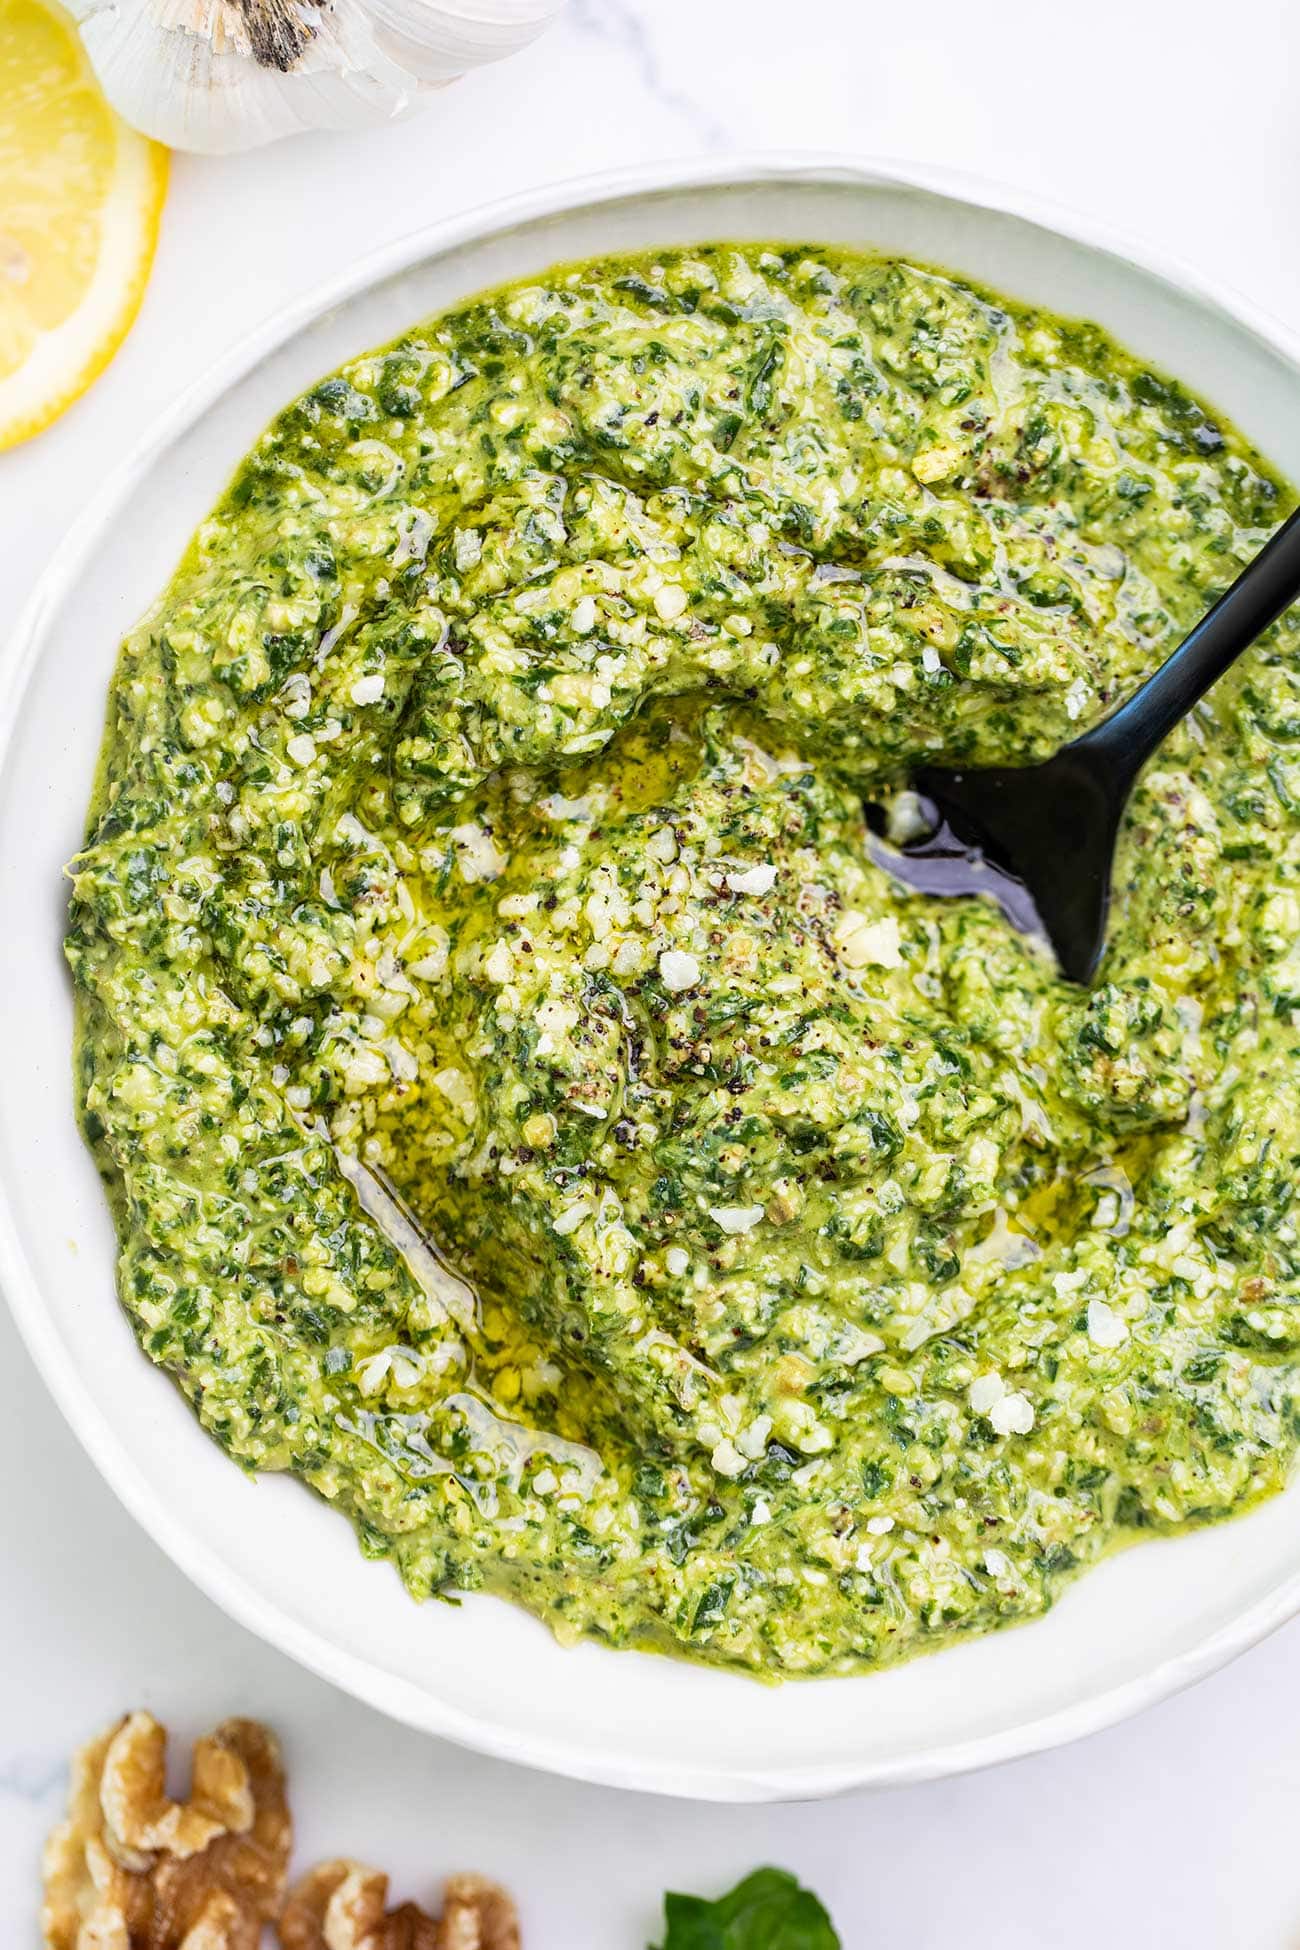 A close up look at a bowl of basil walnut pesto with a black spoon in the center.